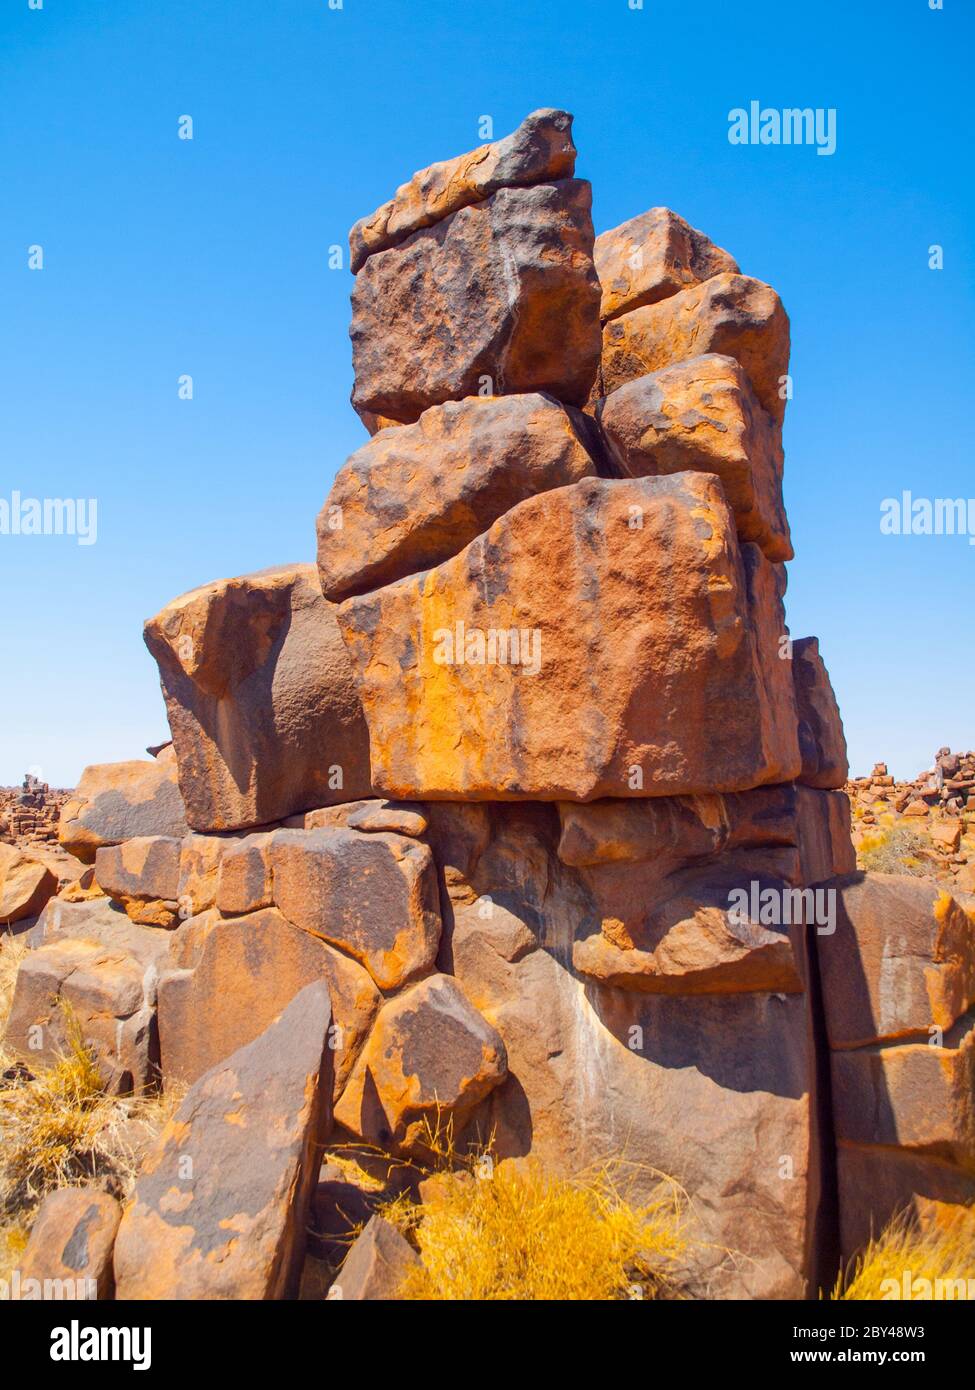 Giant's Playground rock formations on sunny day with clear blue sky near Keetmanshoop, Namibia, Africa Stock Photo